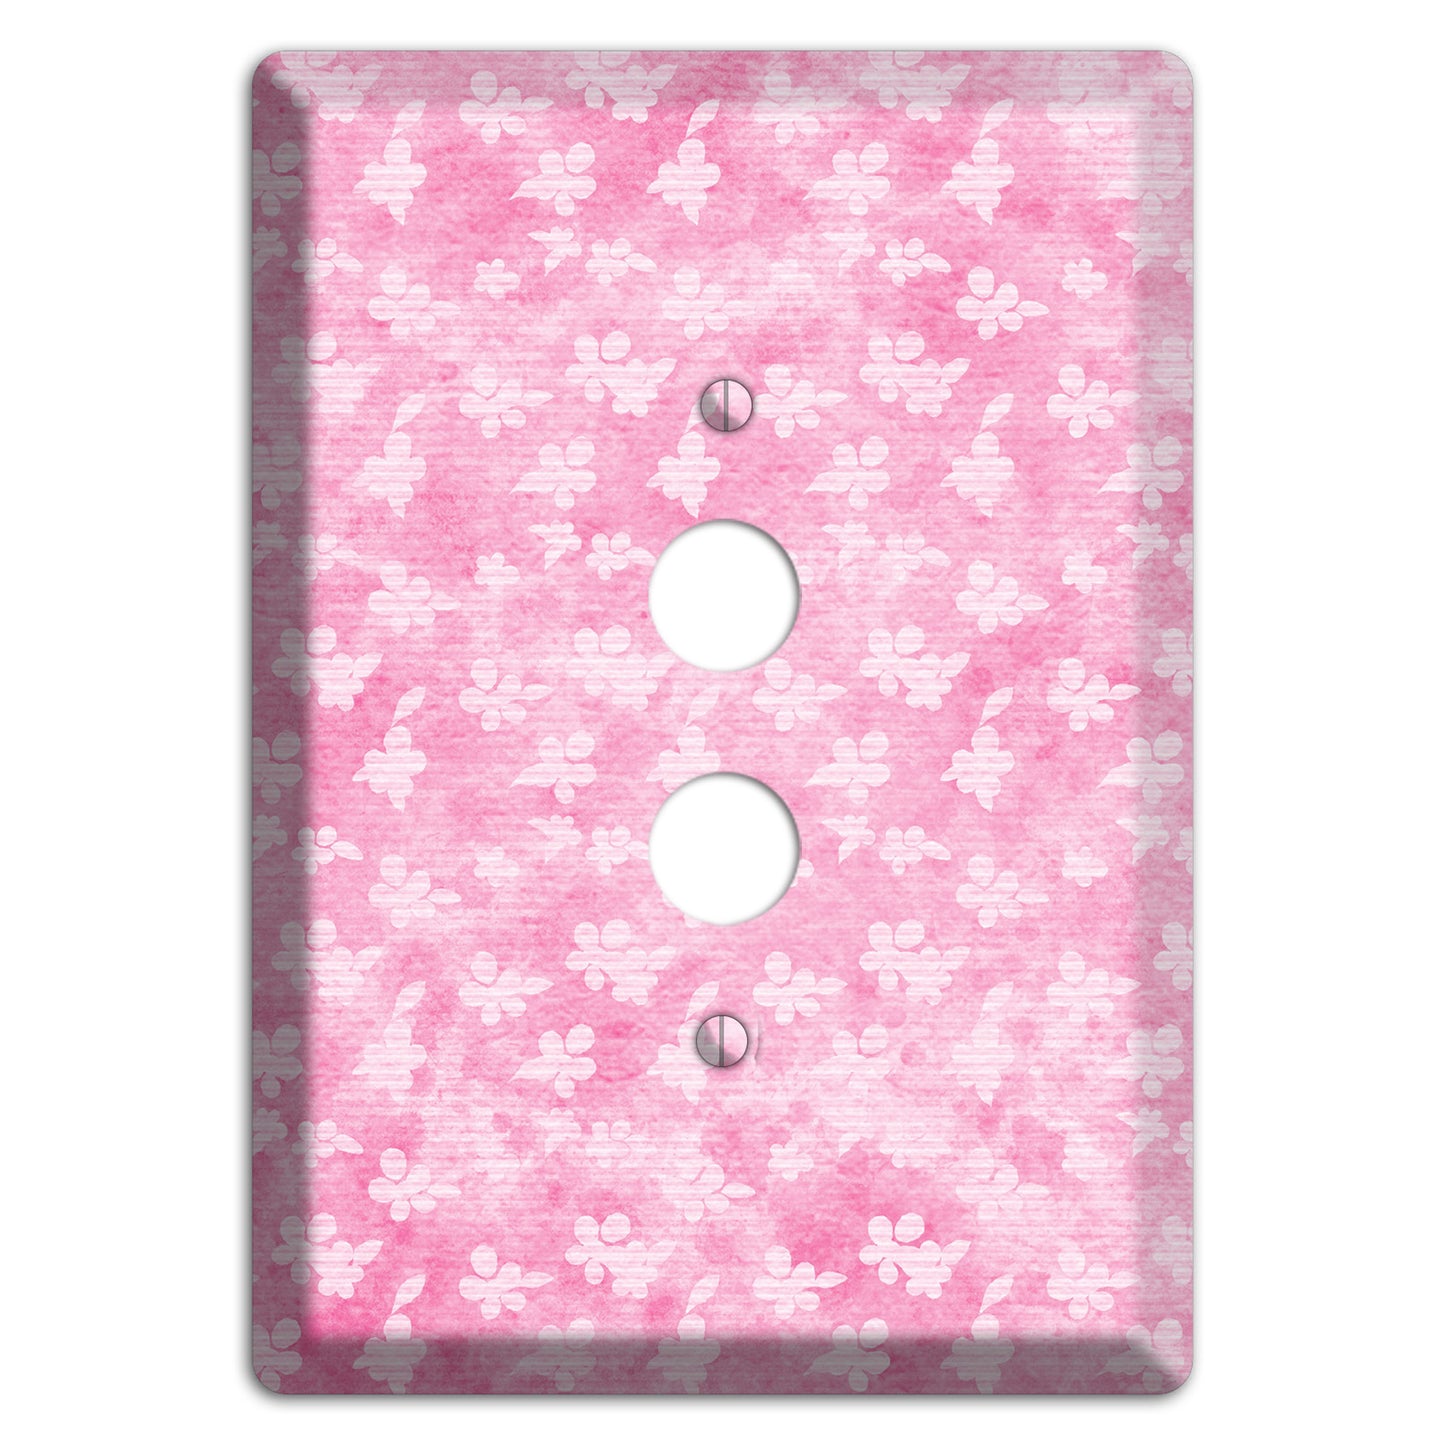 Cupid Pink Texture 1 Pushbutton Wallplate